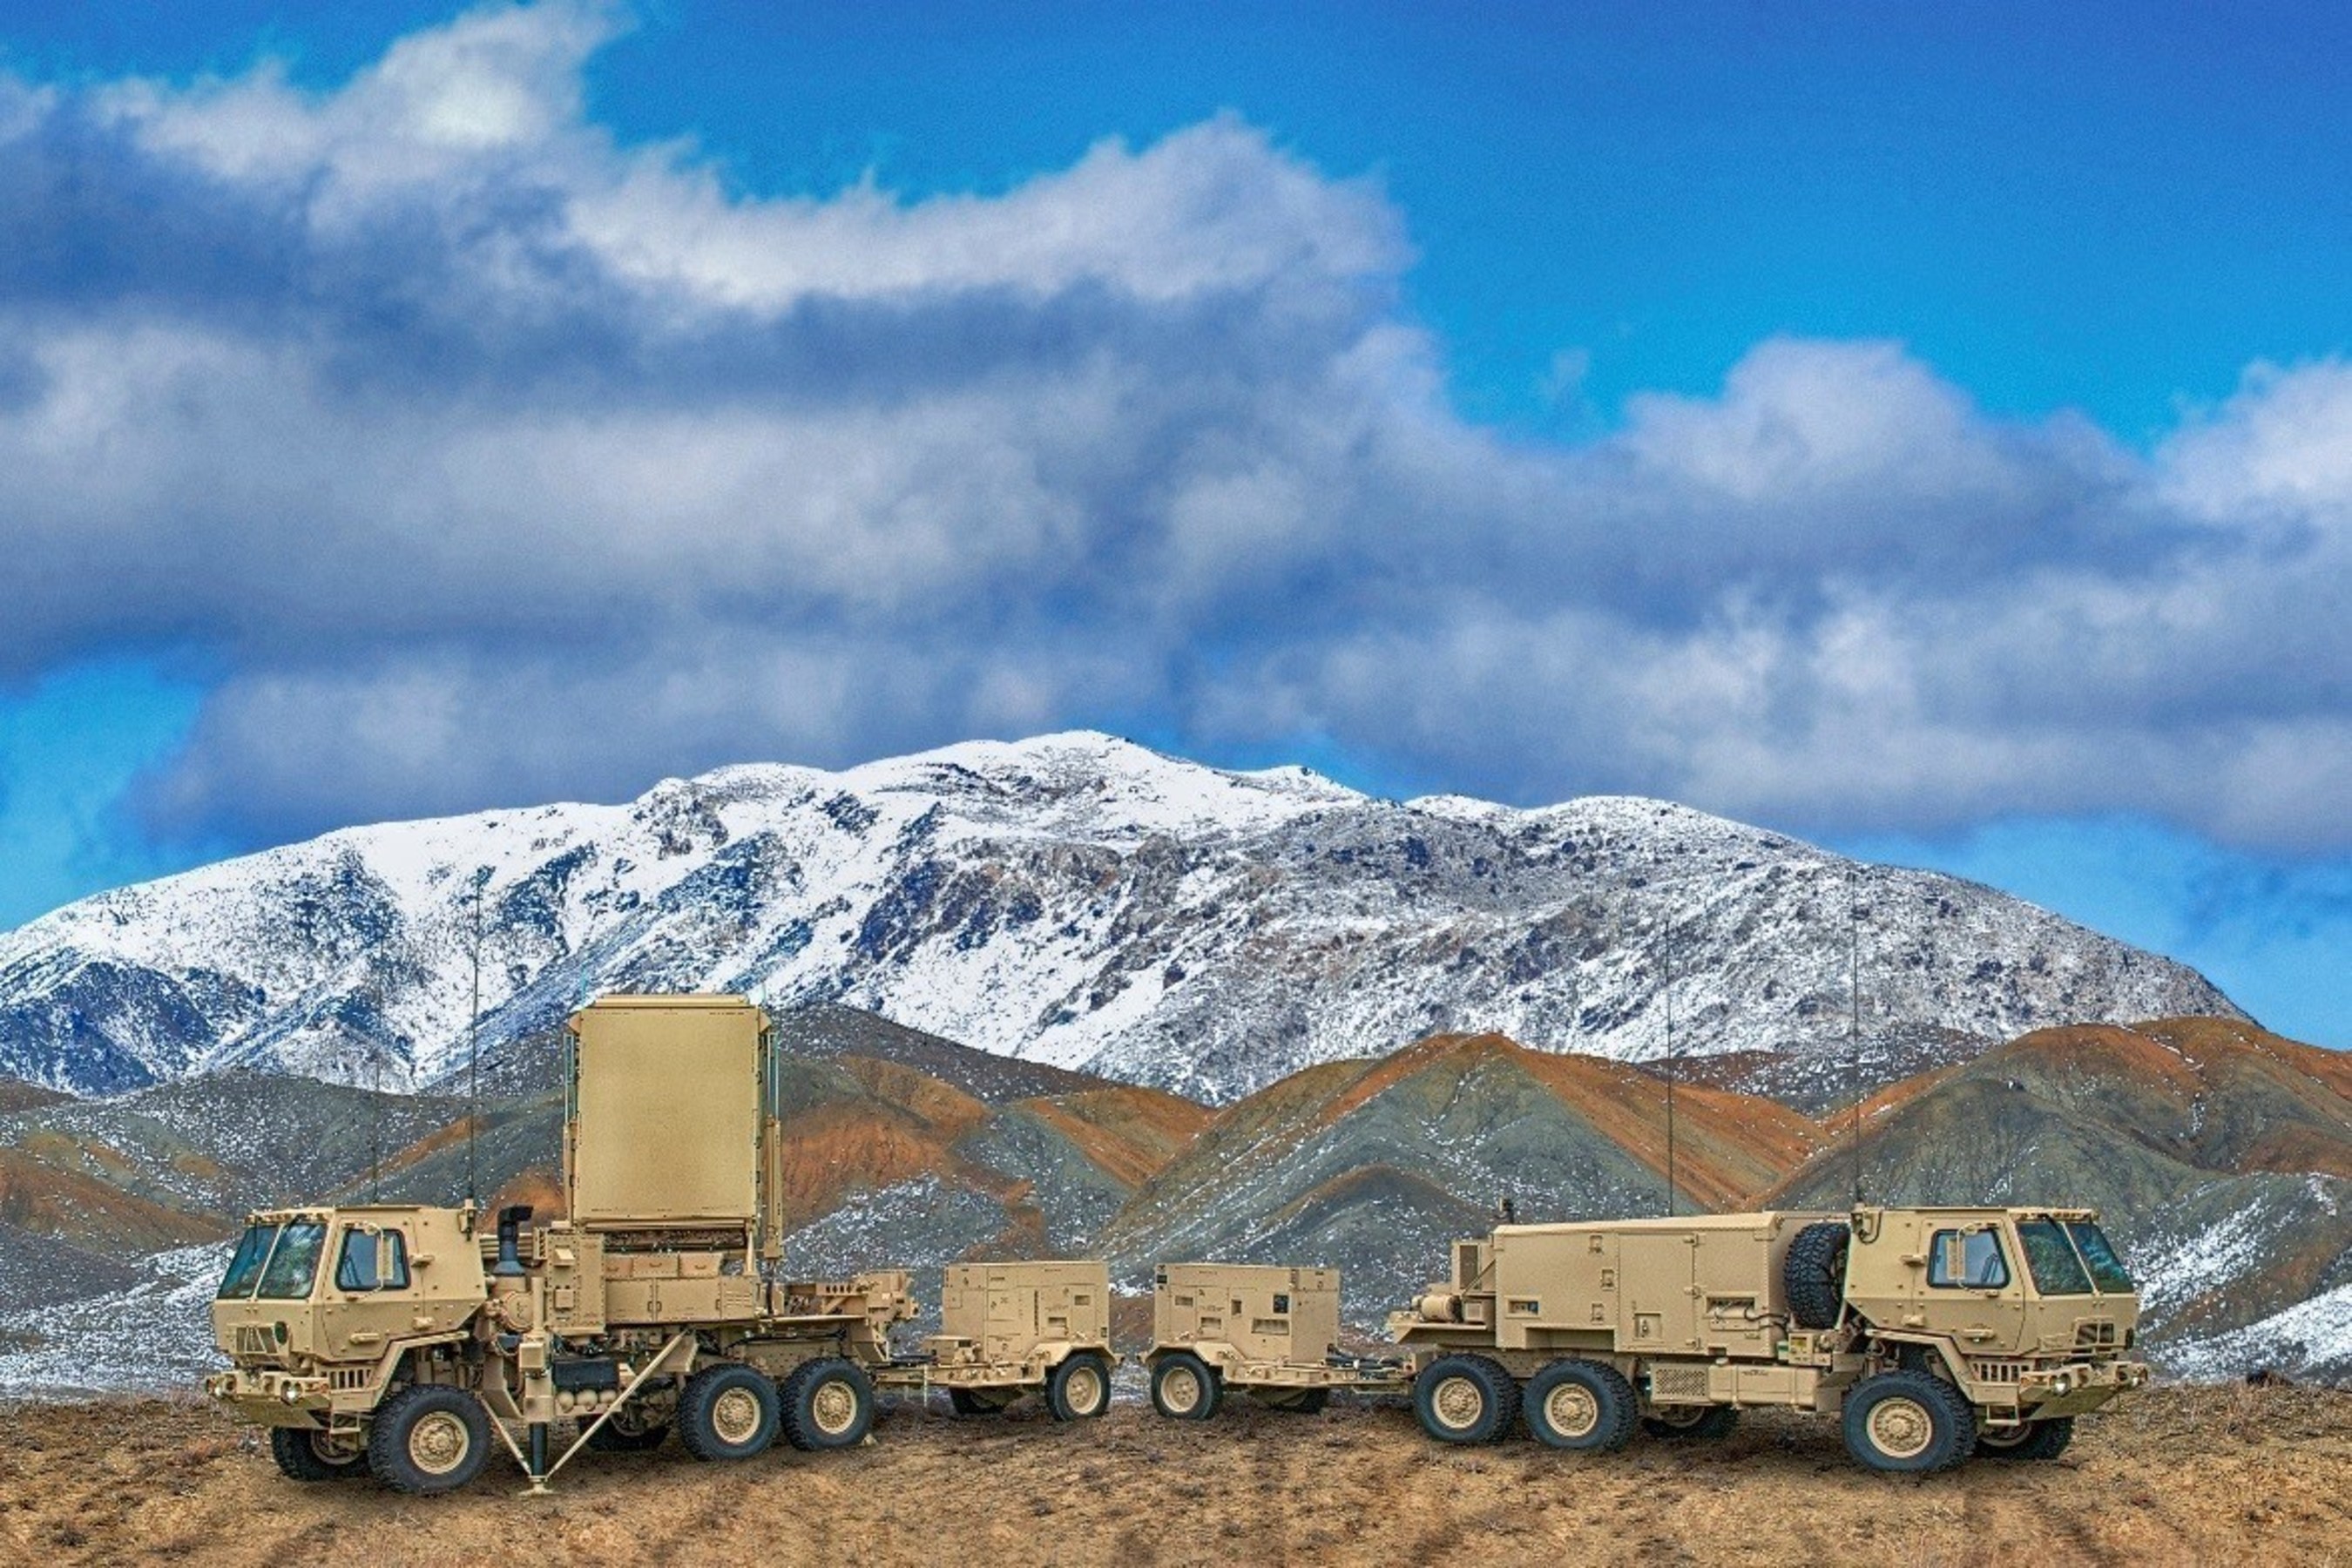 Trust Automation, a U.S. based WOSB, continues to provide Motion Control System for Lockheed Martin's Q-53 Radar Production to the US Army